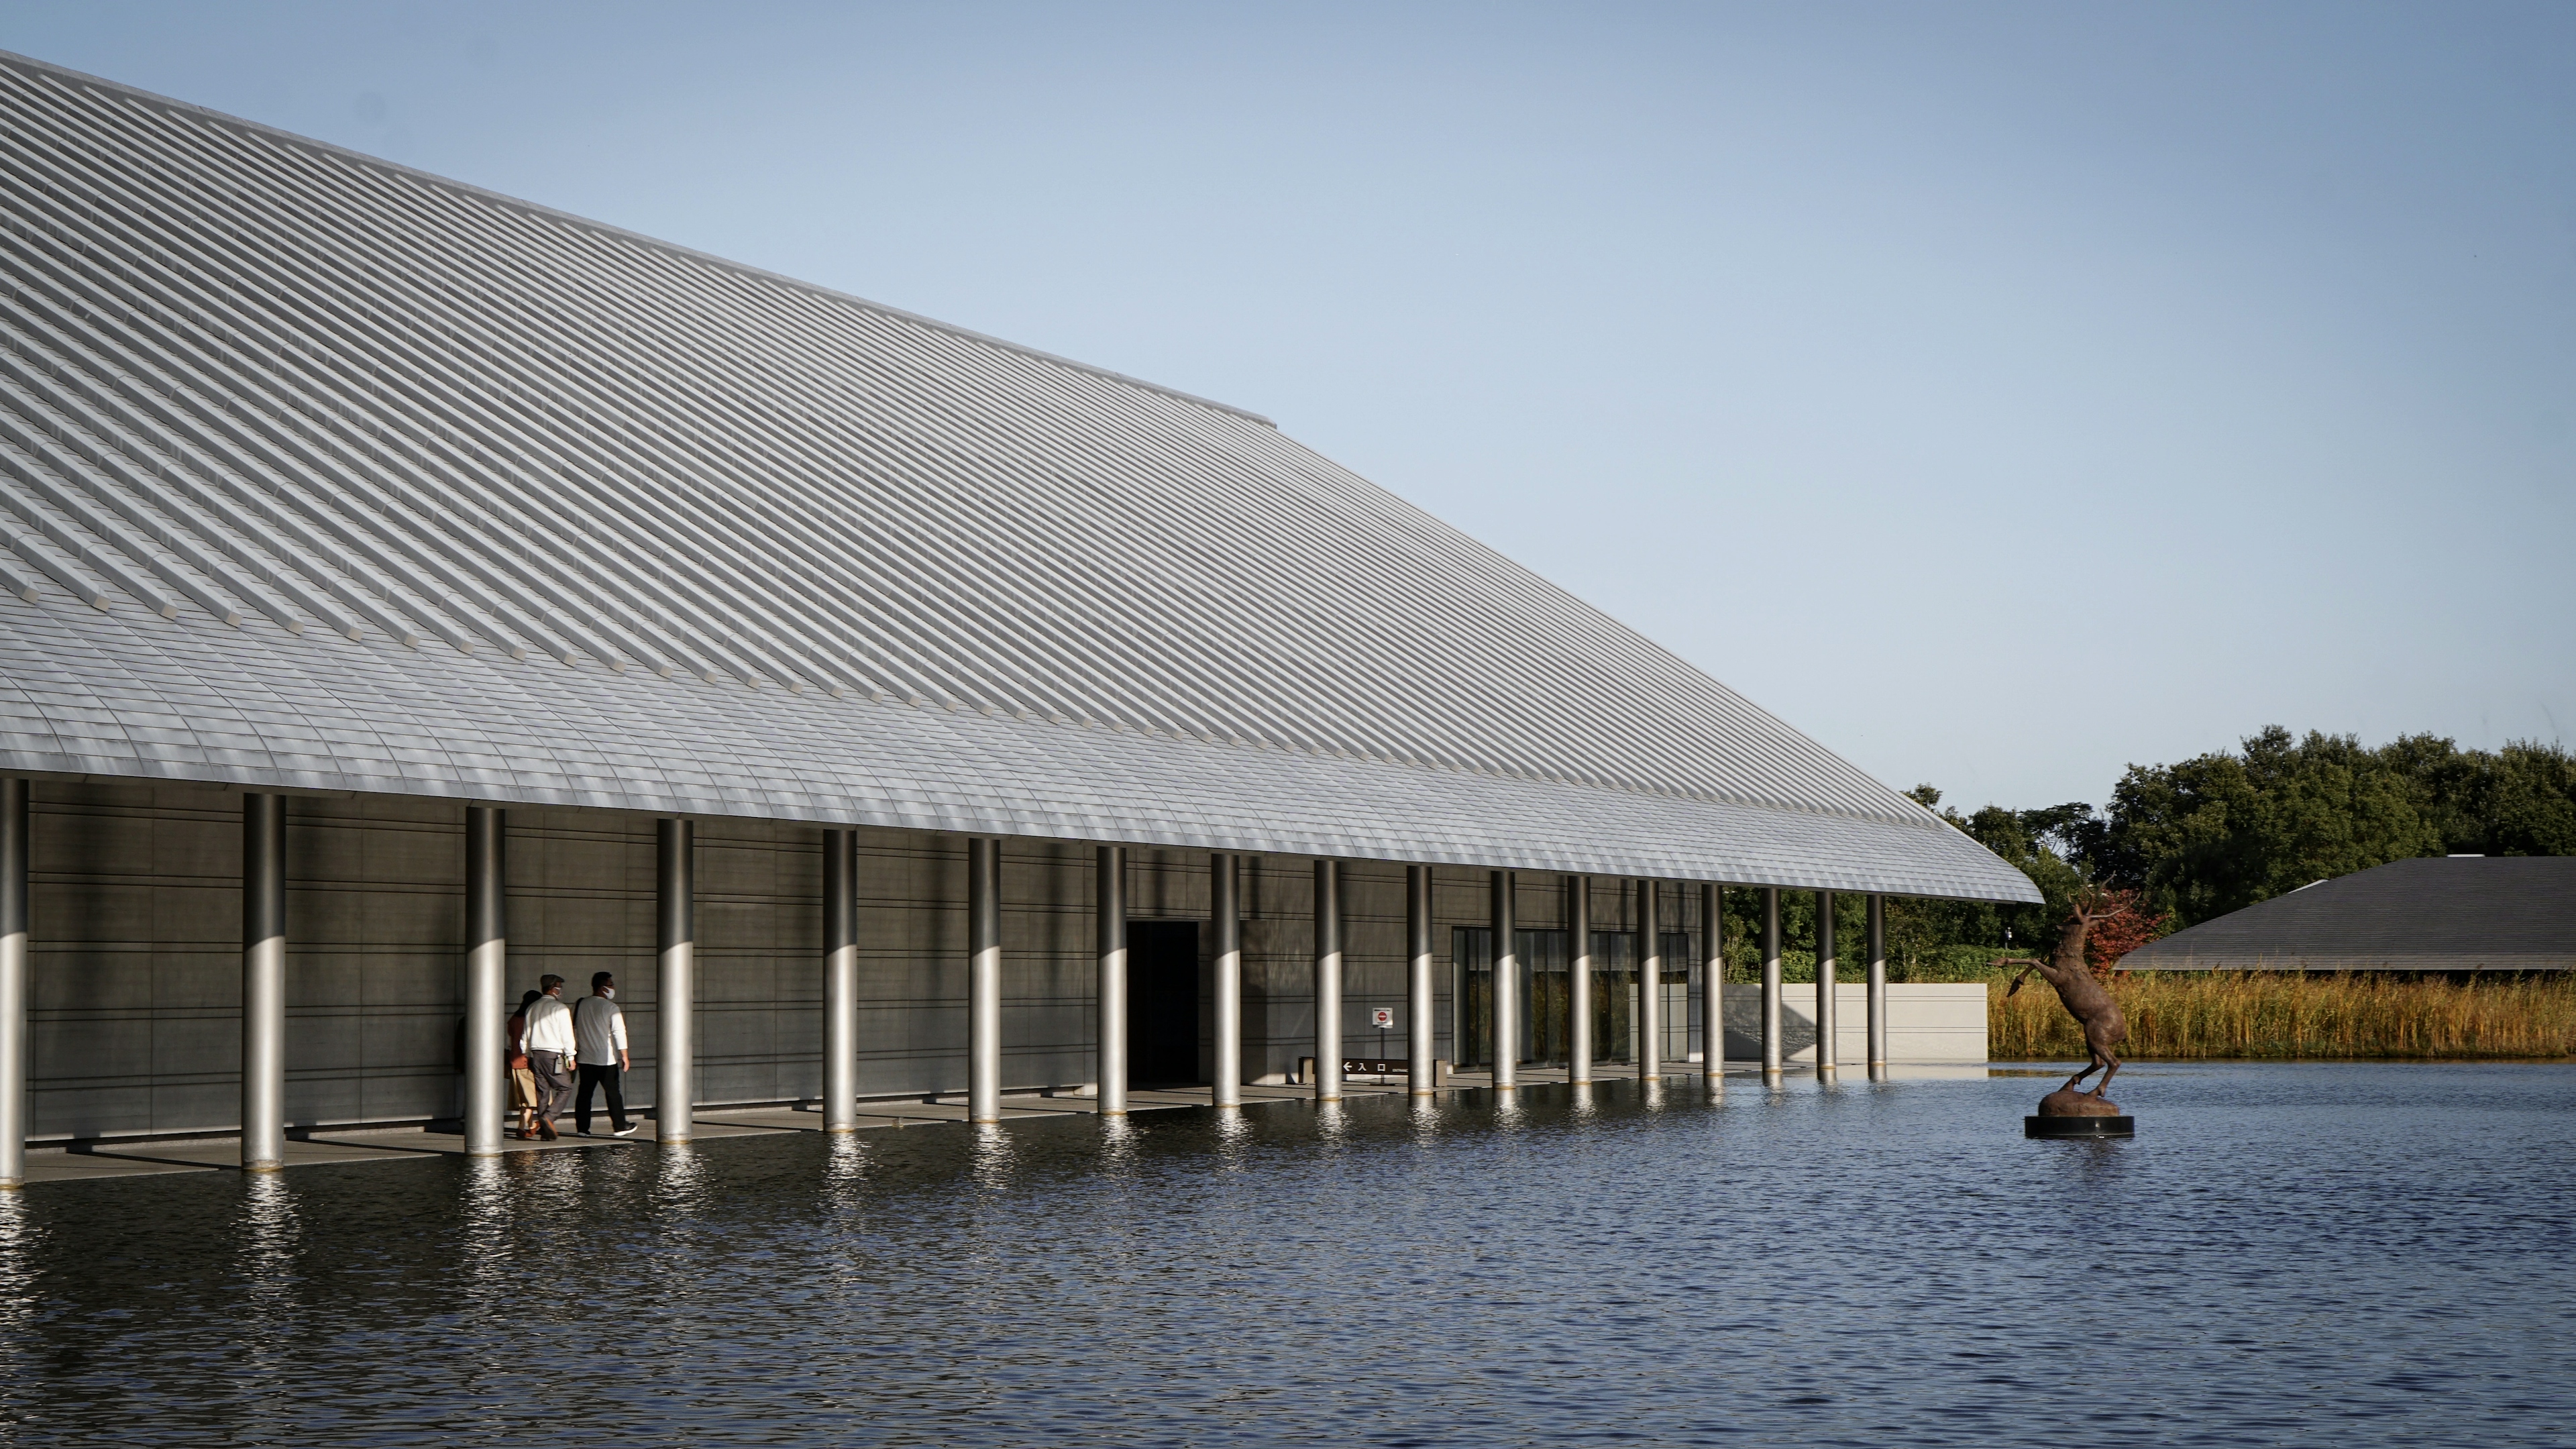 The concrete and steel exterior of Sagawa Art Museum glistens against the sunlight hitting the surrounding pool